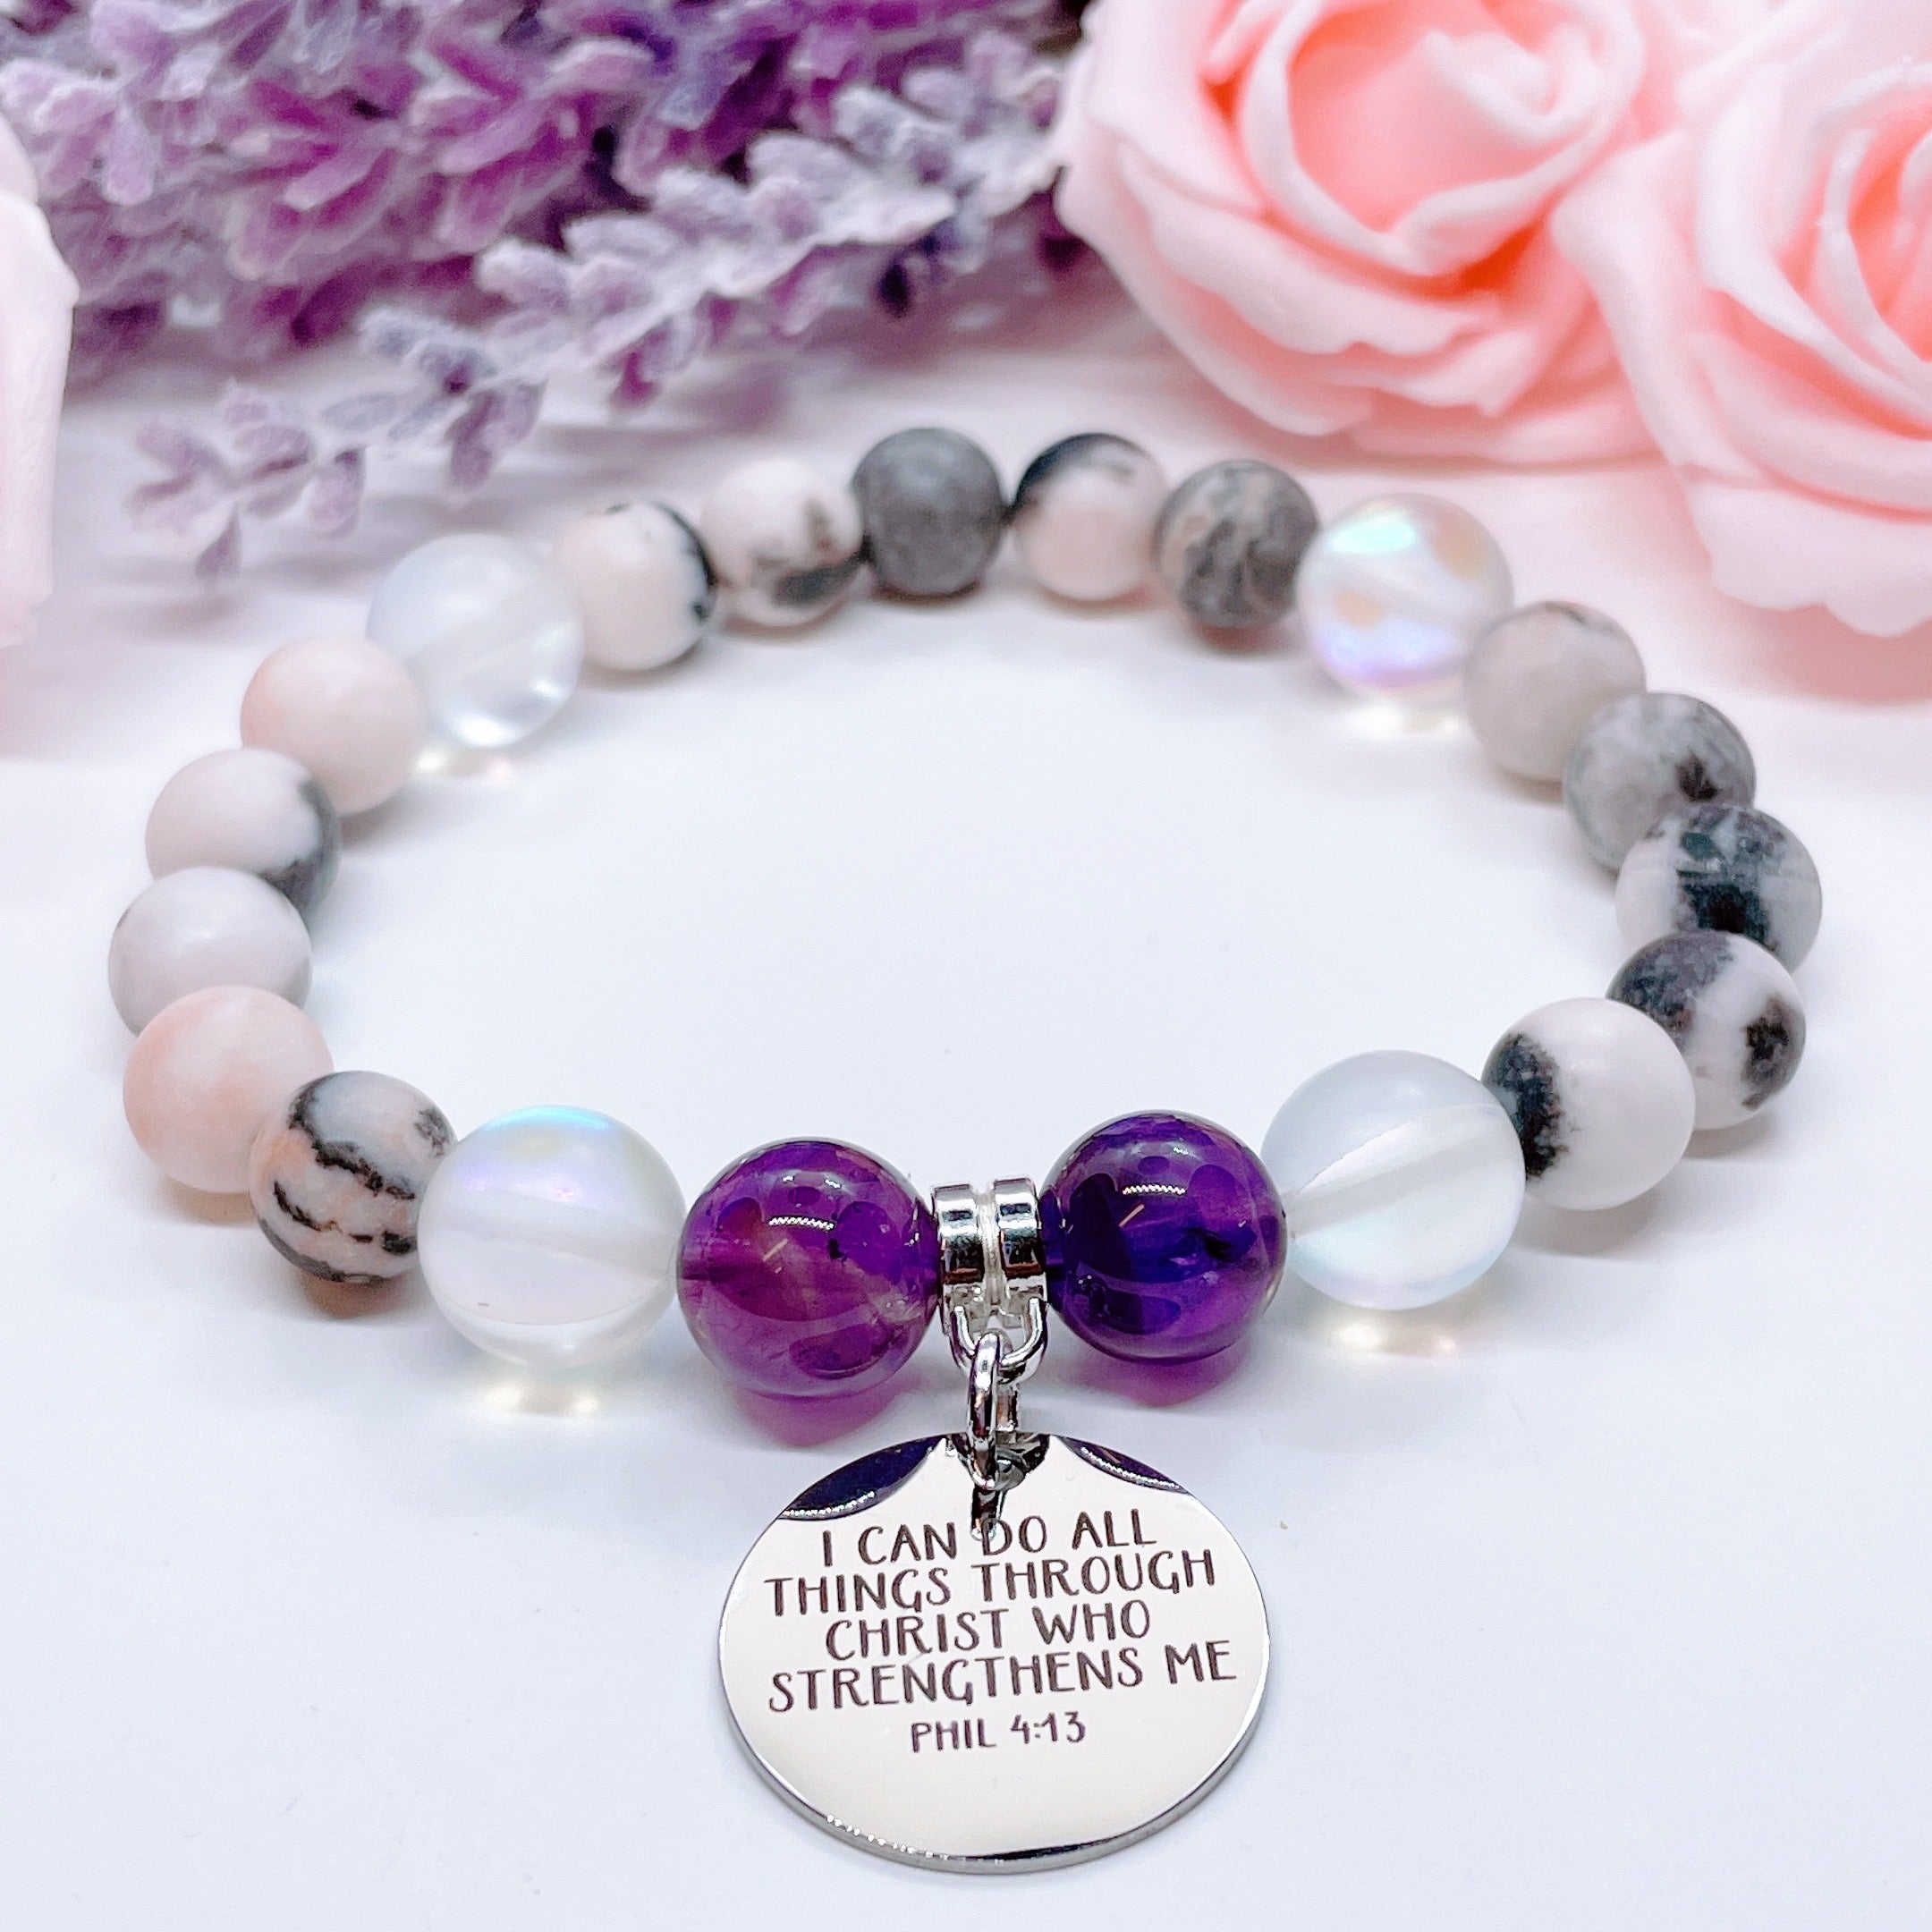 I Can do all Things Through Christ who Strengthens Me Charm Bracelet Amethyst